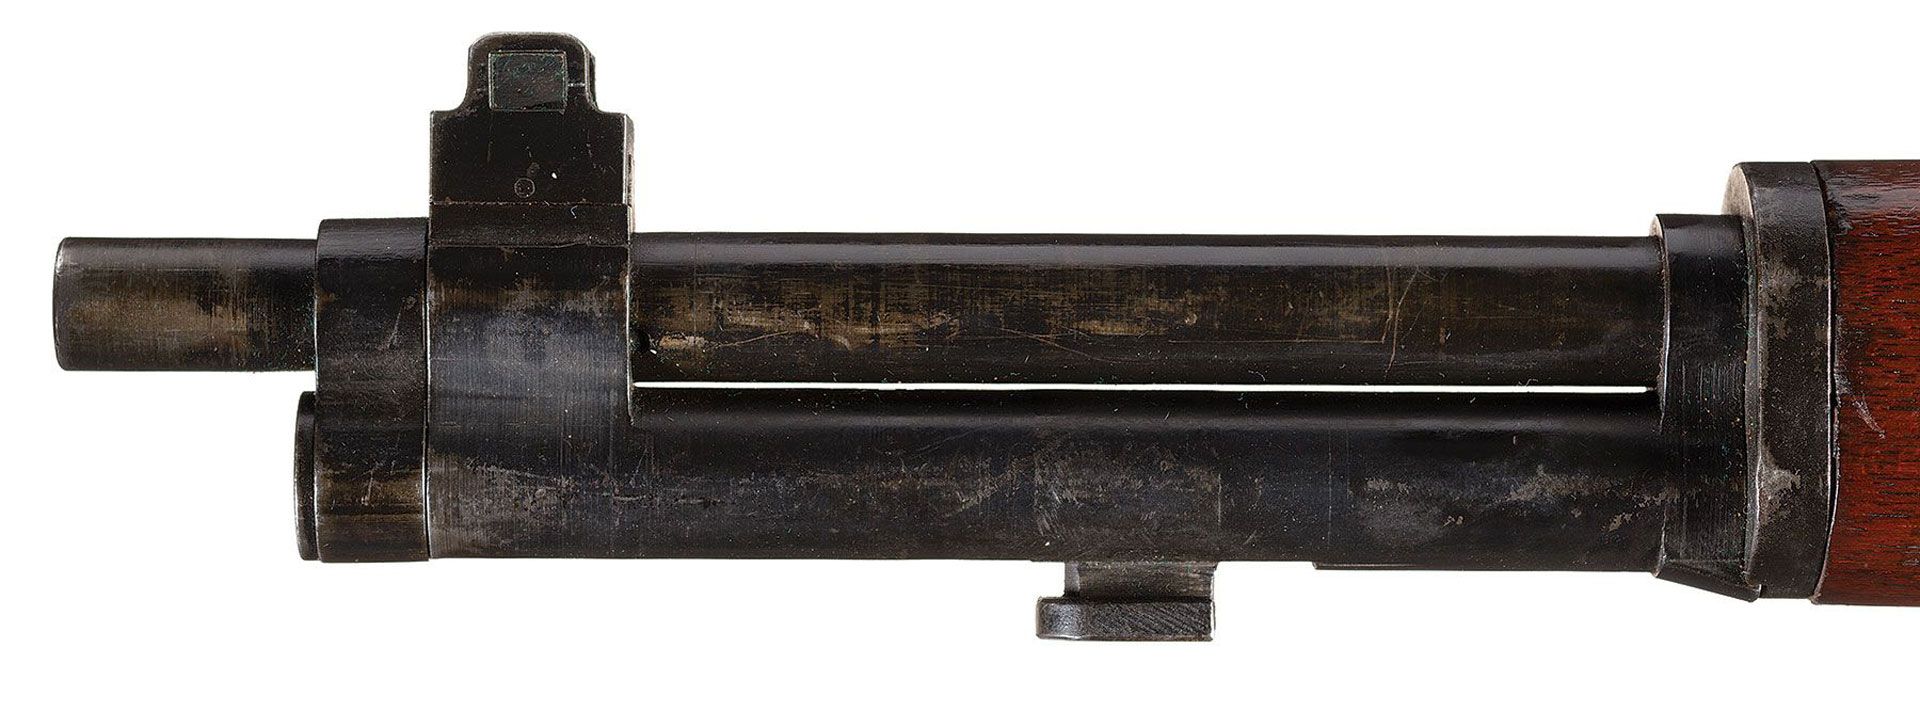 barrel-of-the-Japanese-Type-5-rifle